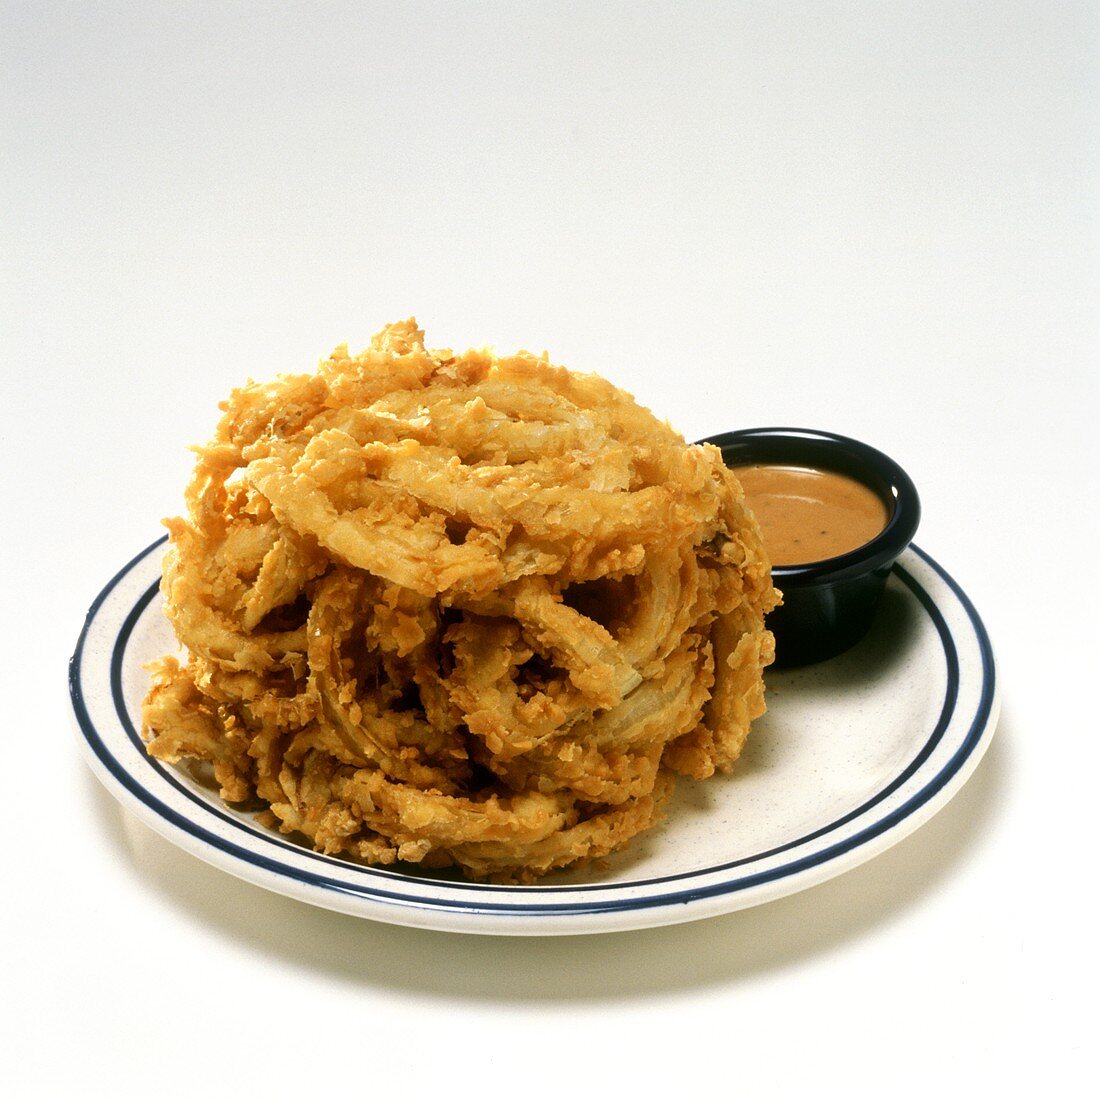 Pile of Fried Onion Rings